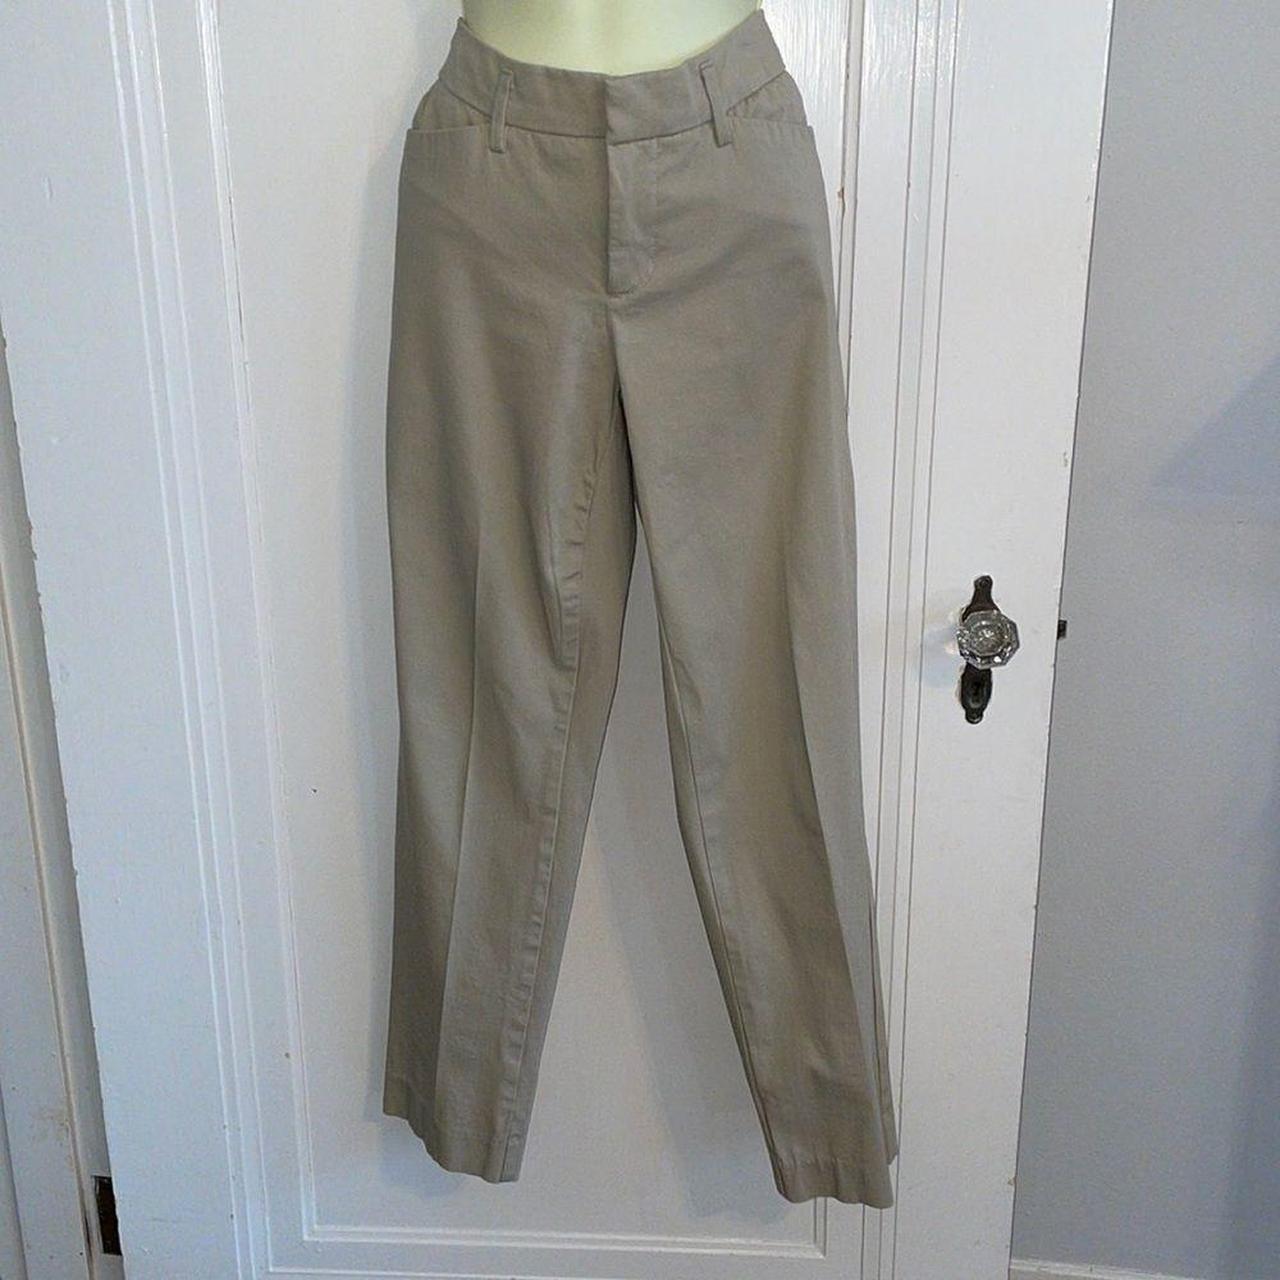 Sundance The Most Fabulous Pant Business Casual Trousers Cotton Rayon  Spandex 8